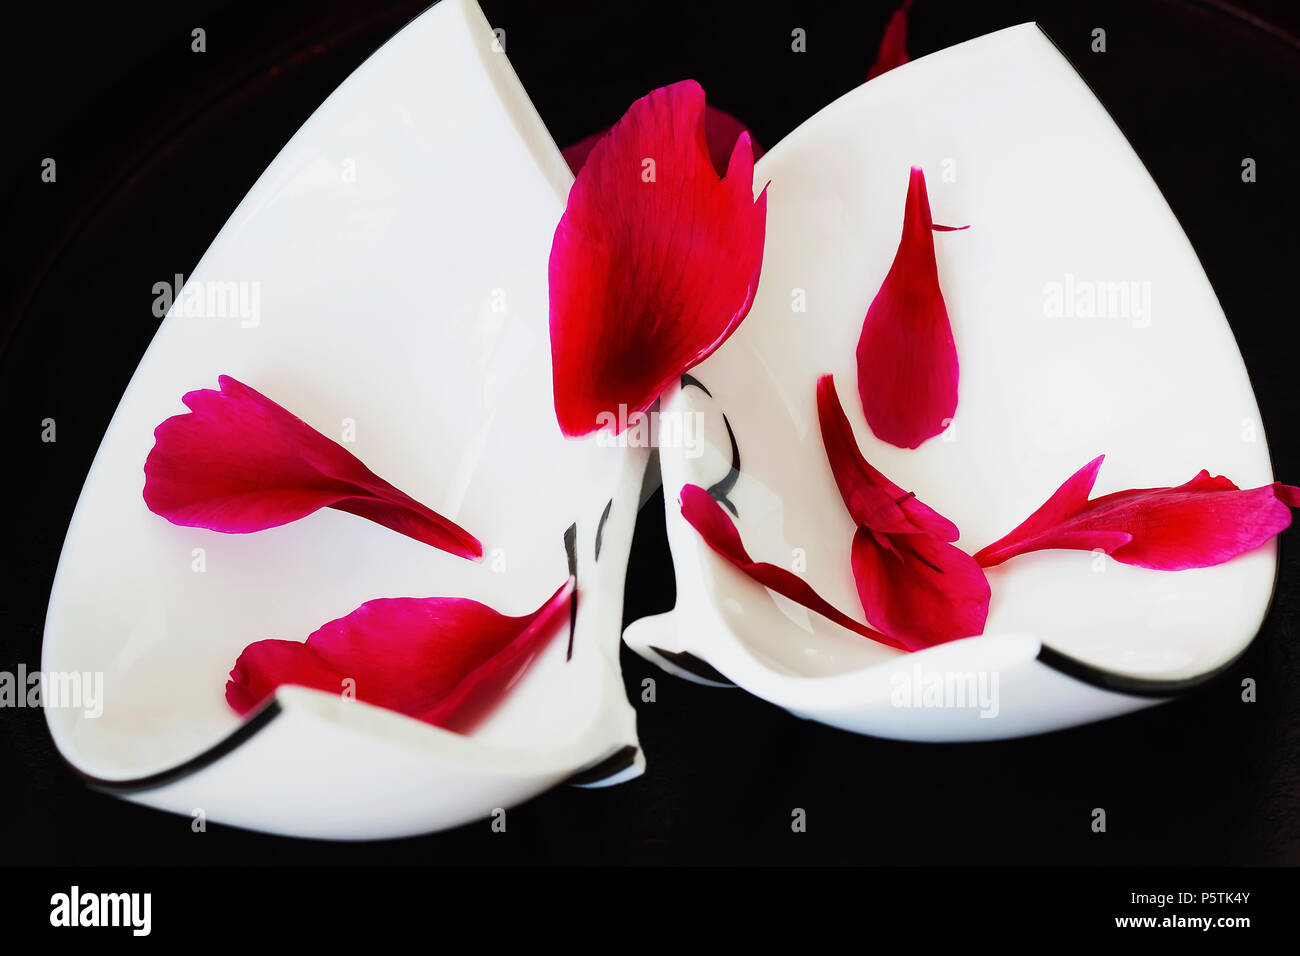 Close up of a broken white ceramic plate on black background with red crumbled flower petals. Concept for divorce, relationships, friendships Stock Photo